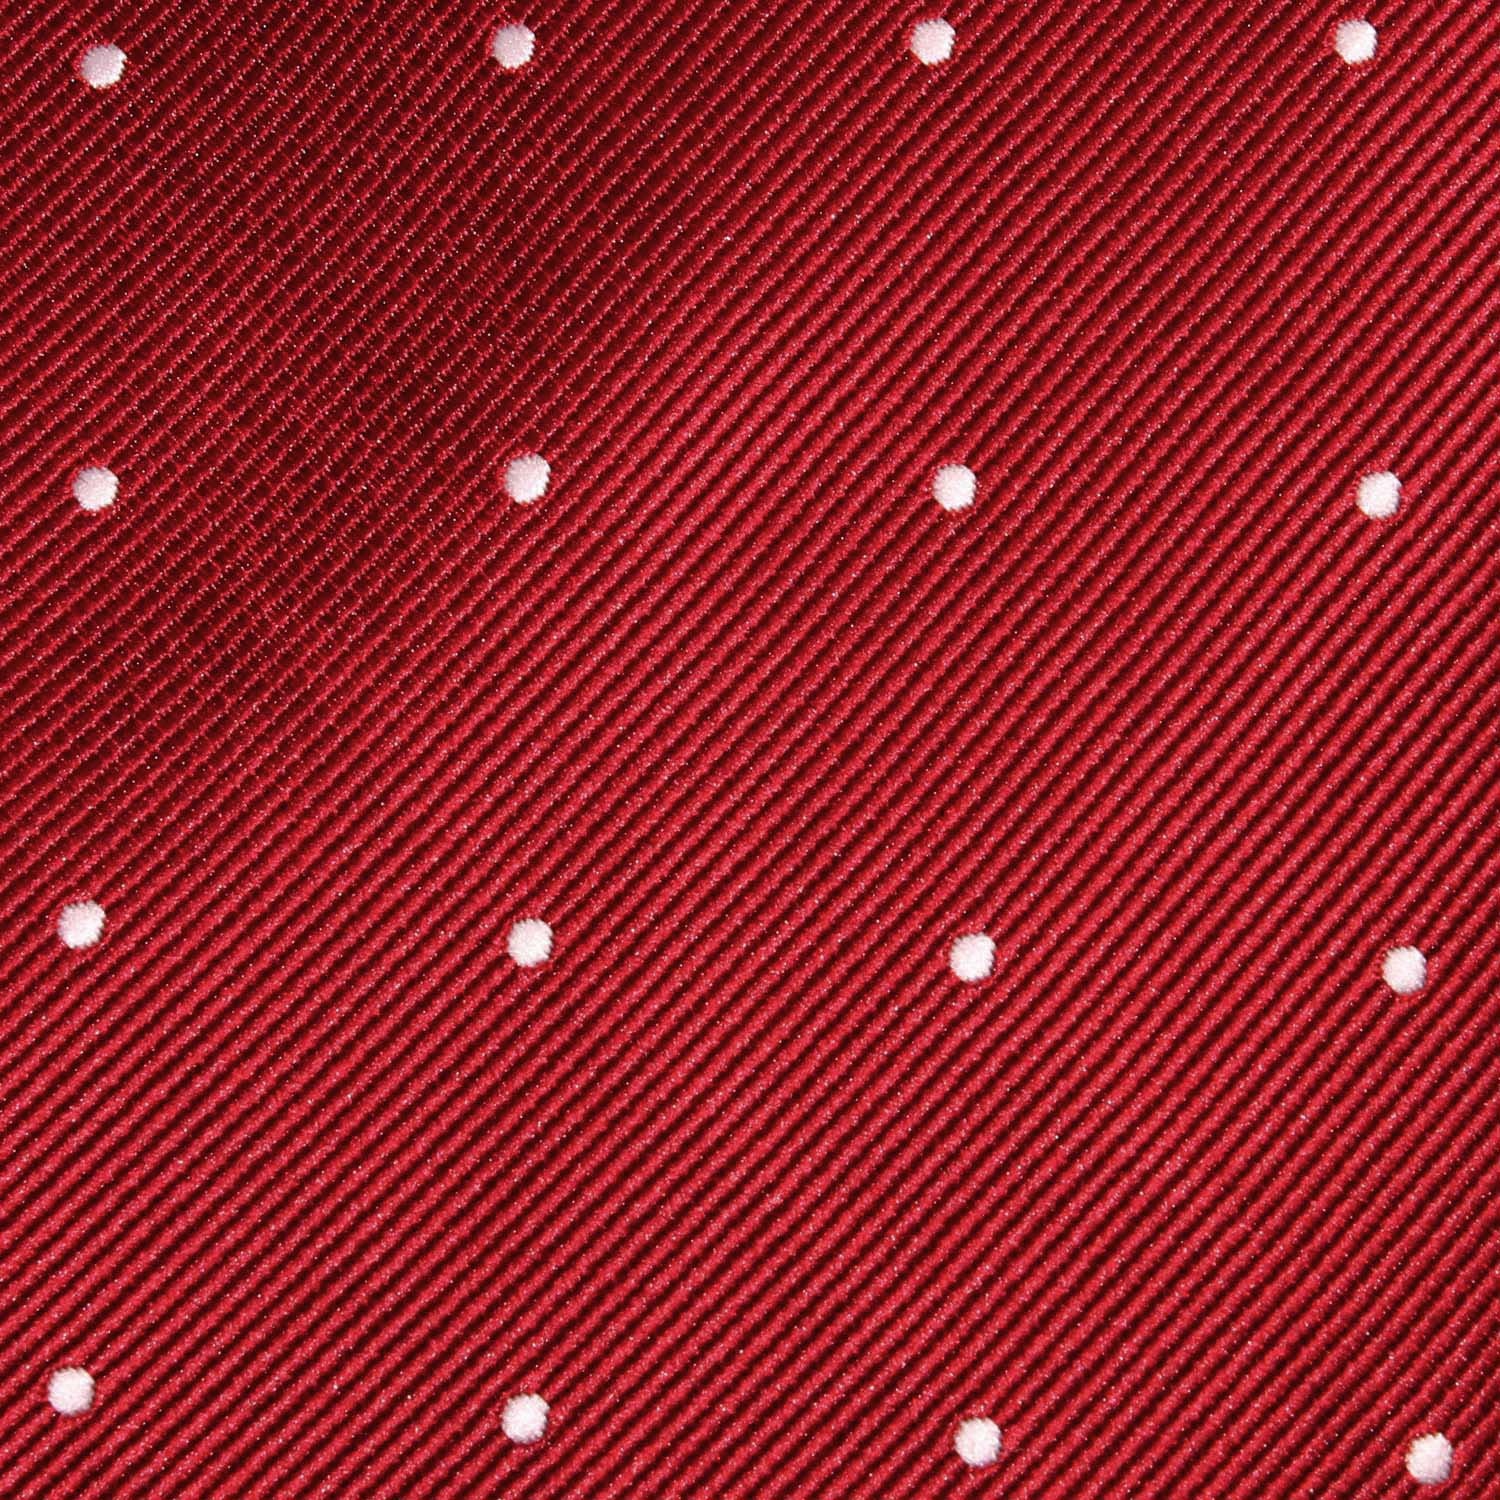 Maroon with White Polka Dots Fabric Kids Bow Tie M045